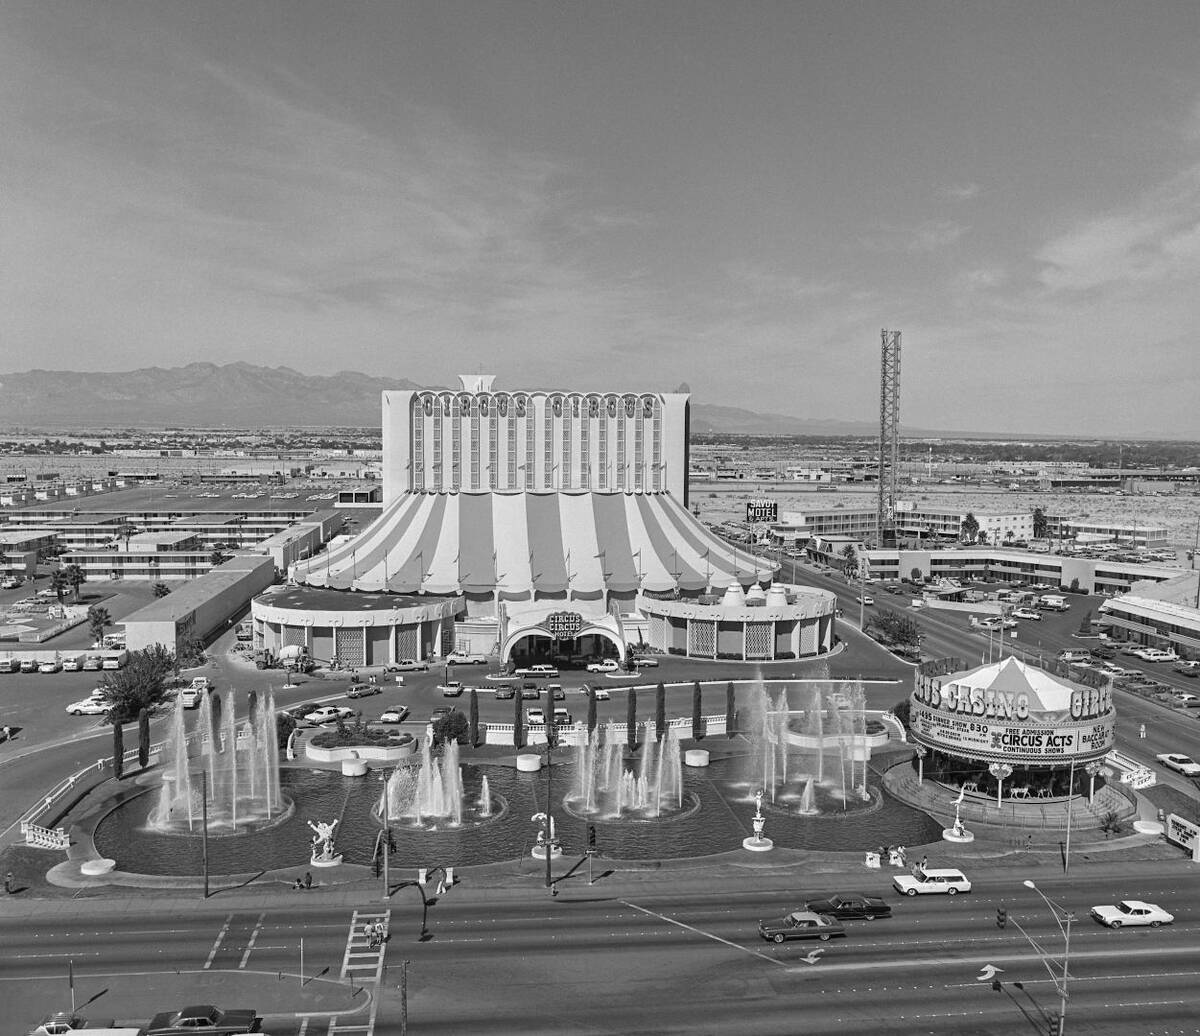 The exterior of Circus Circus is seen in this view from the top of the Riviera September 21, 19 ...